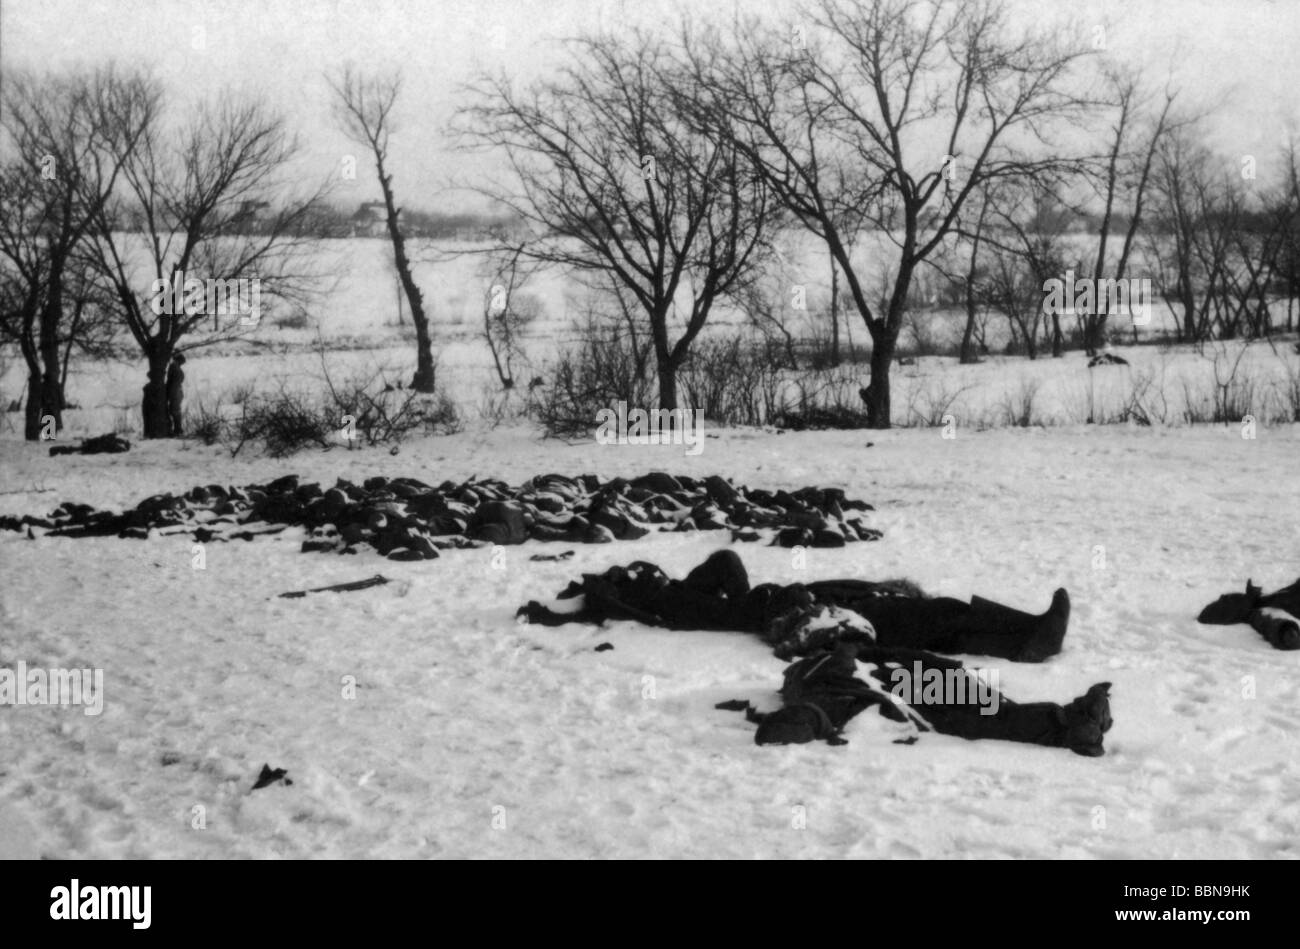 events, Second World War / WWII, Russia 1944 / 1945, fallen Soviet soldiers after a German counterattack near Britskoye, Ukraine, 27.1.1944, corpses, dead bodies, Eastern Front, Red Army, 20th century, Soviet Union, USSR, historic, historical, death, losses, snow, 1940s, people, Stock Photo